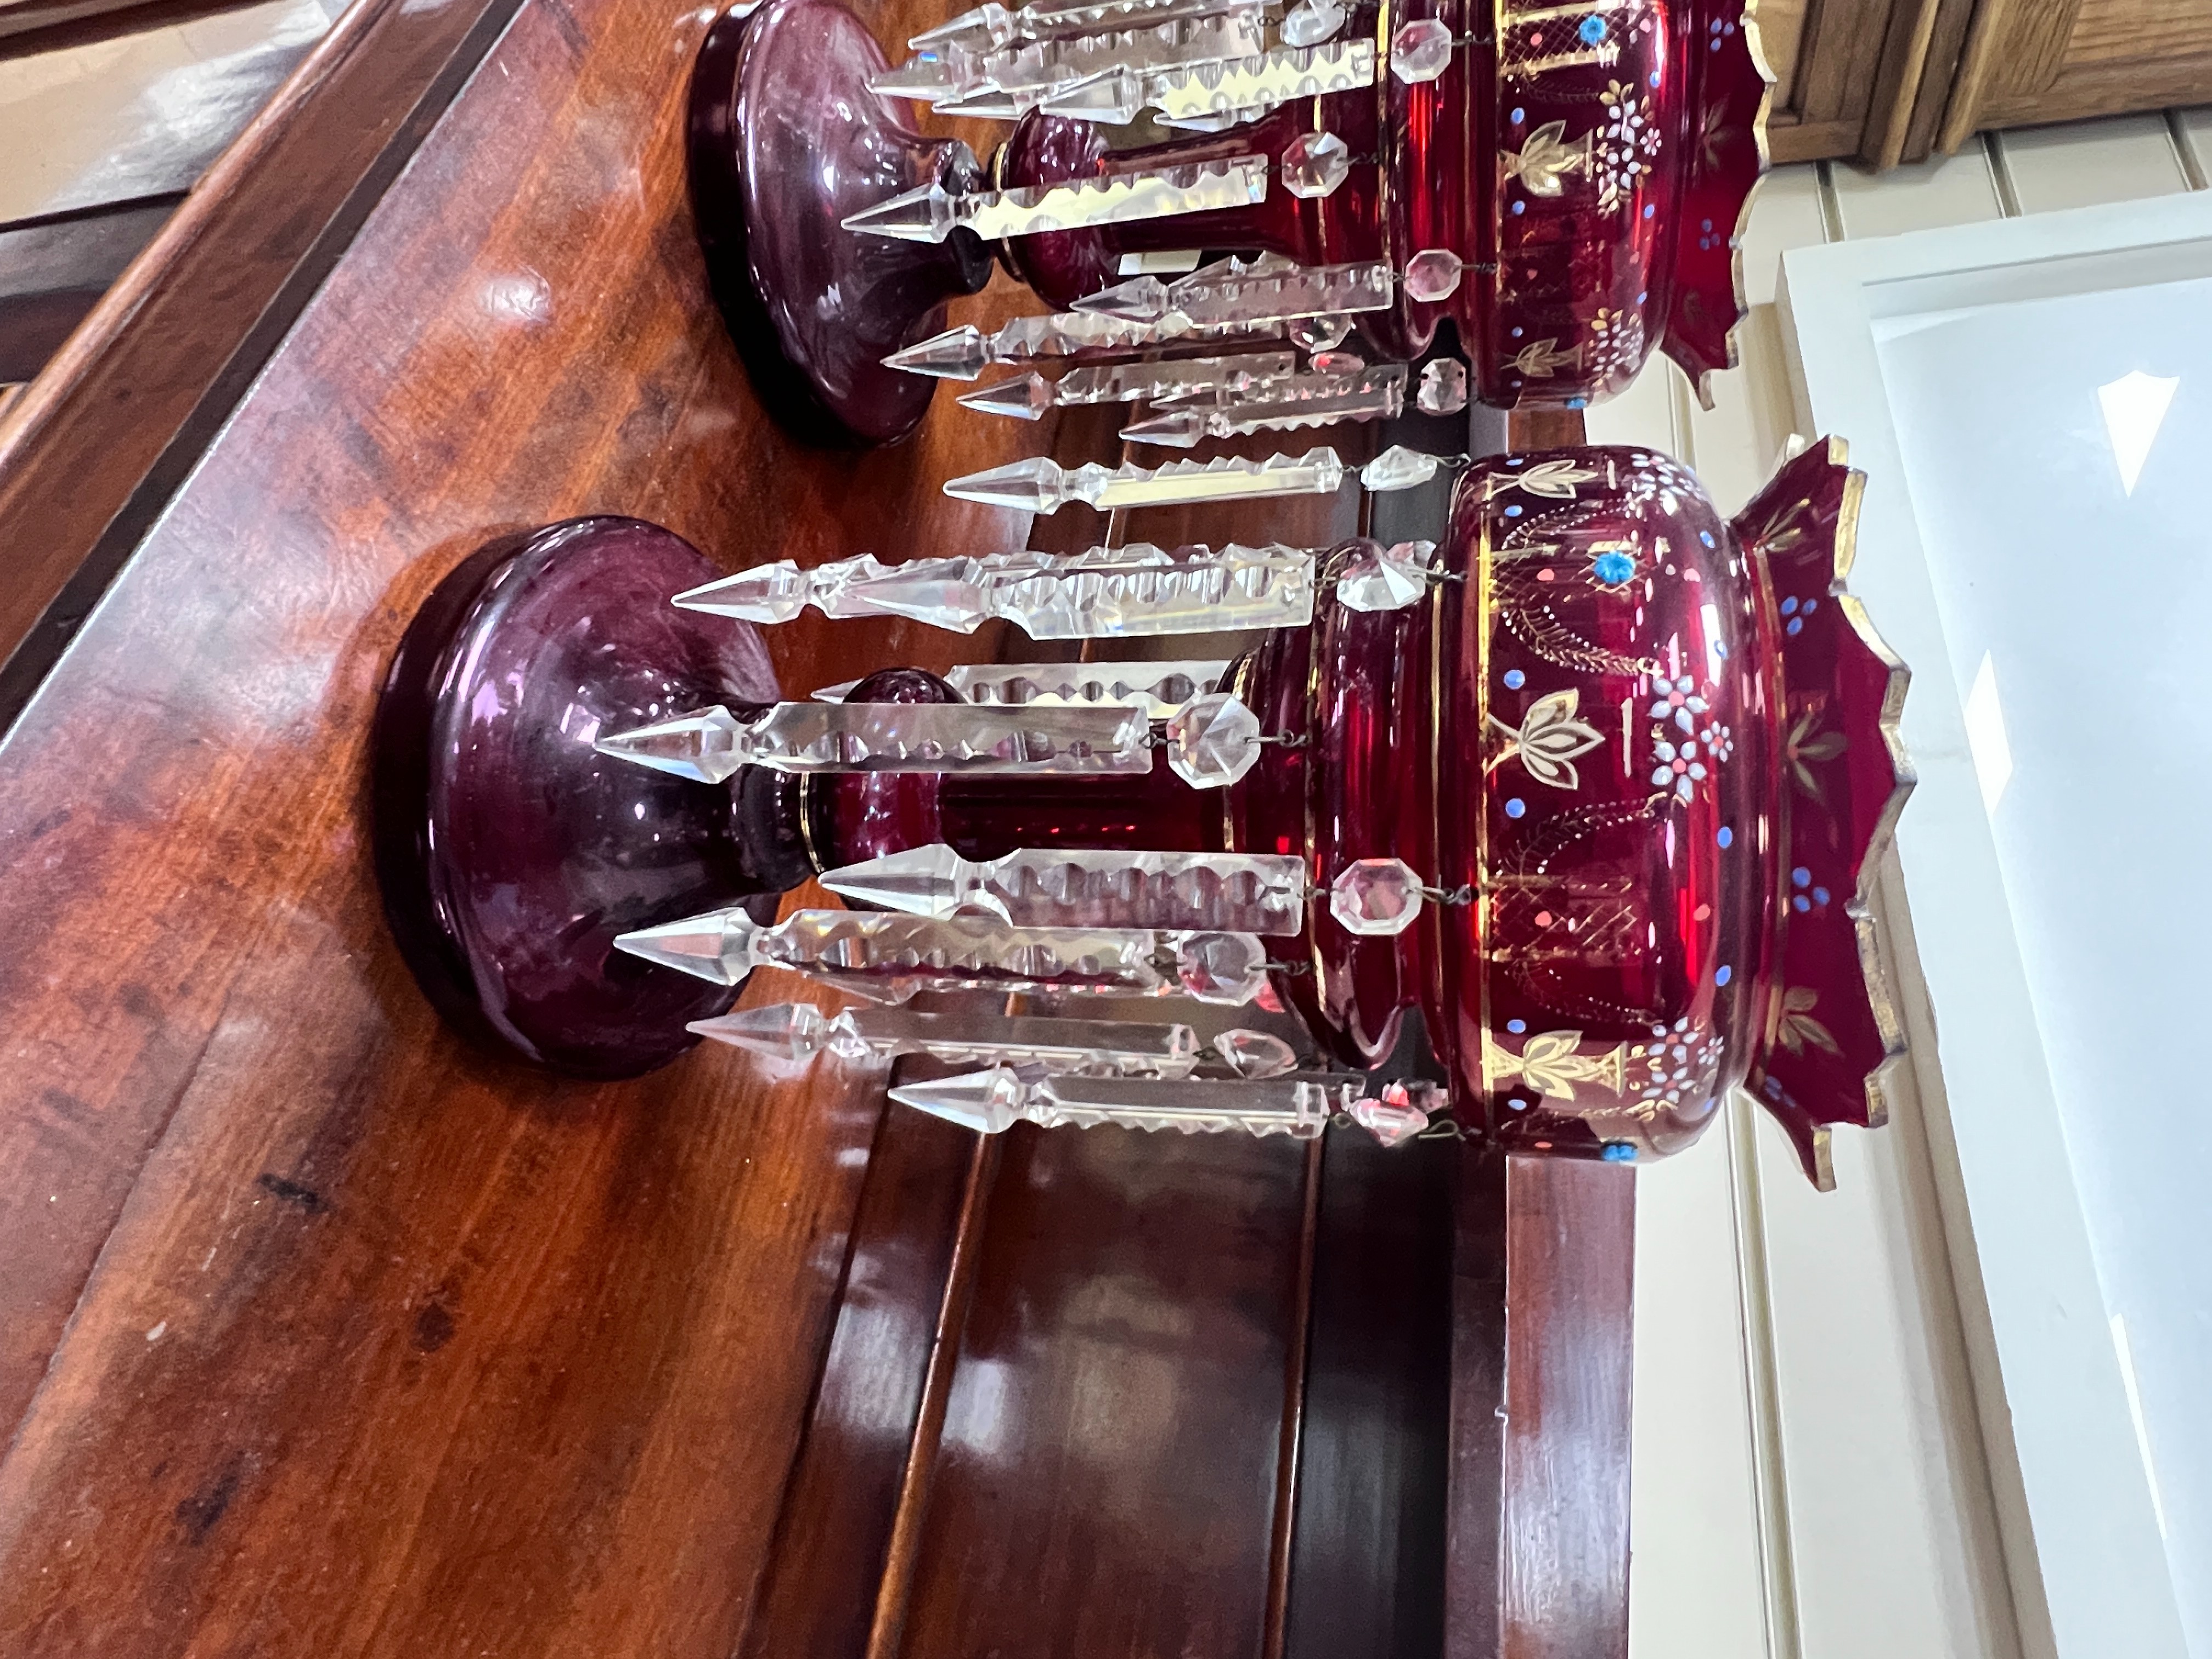 A pair of Victorian ruby glass table lustres, 36 cms high